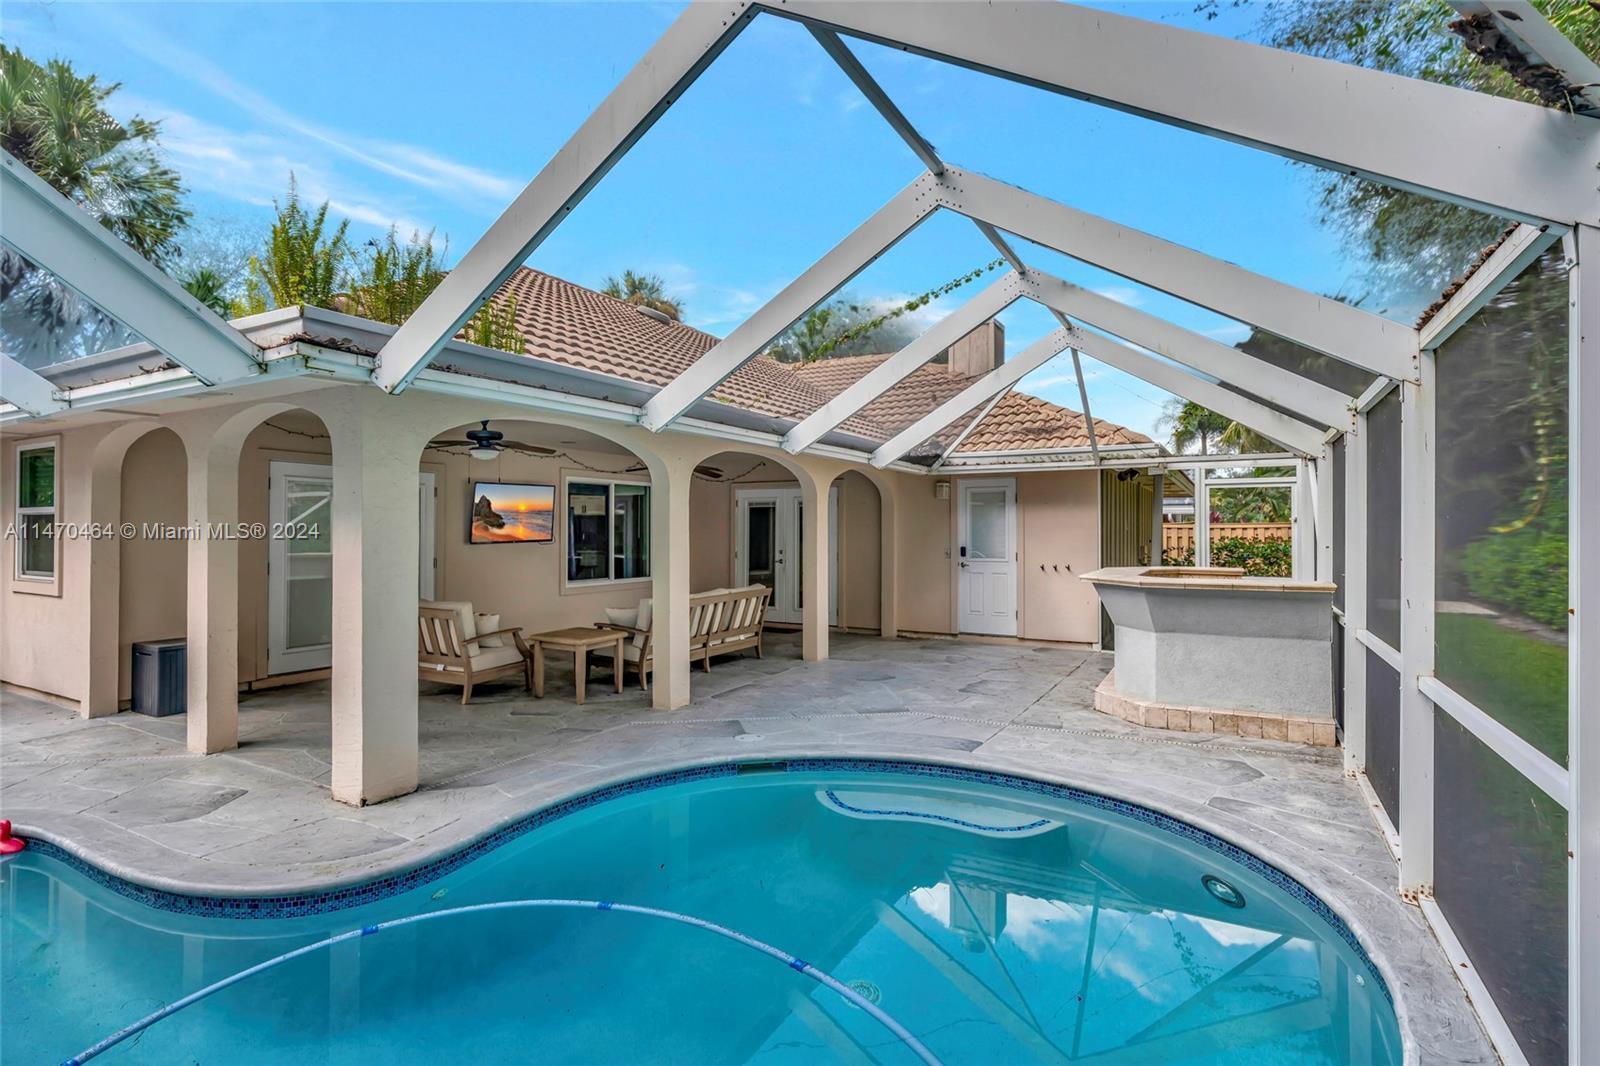 Welcome to this beautiful home in the highly desirable community of The Shores of Jupiter. This home